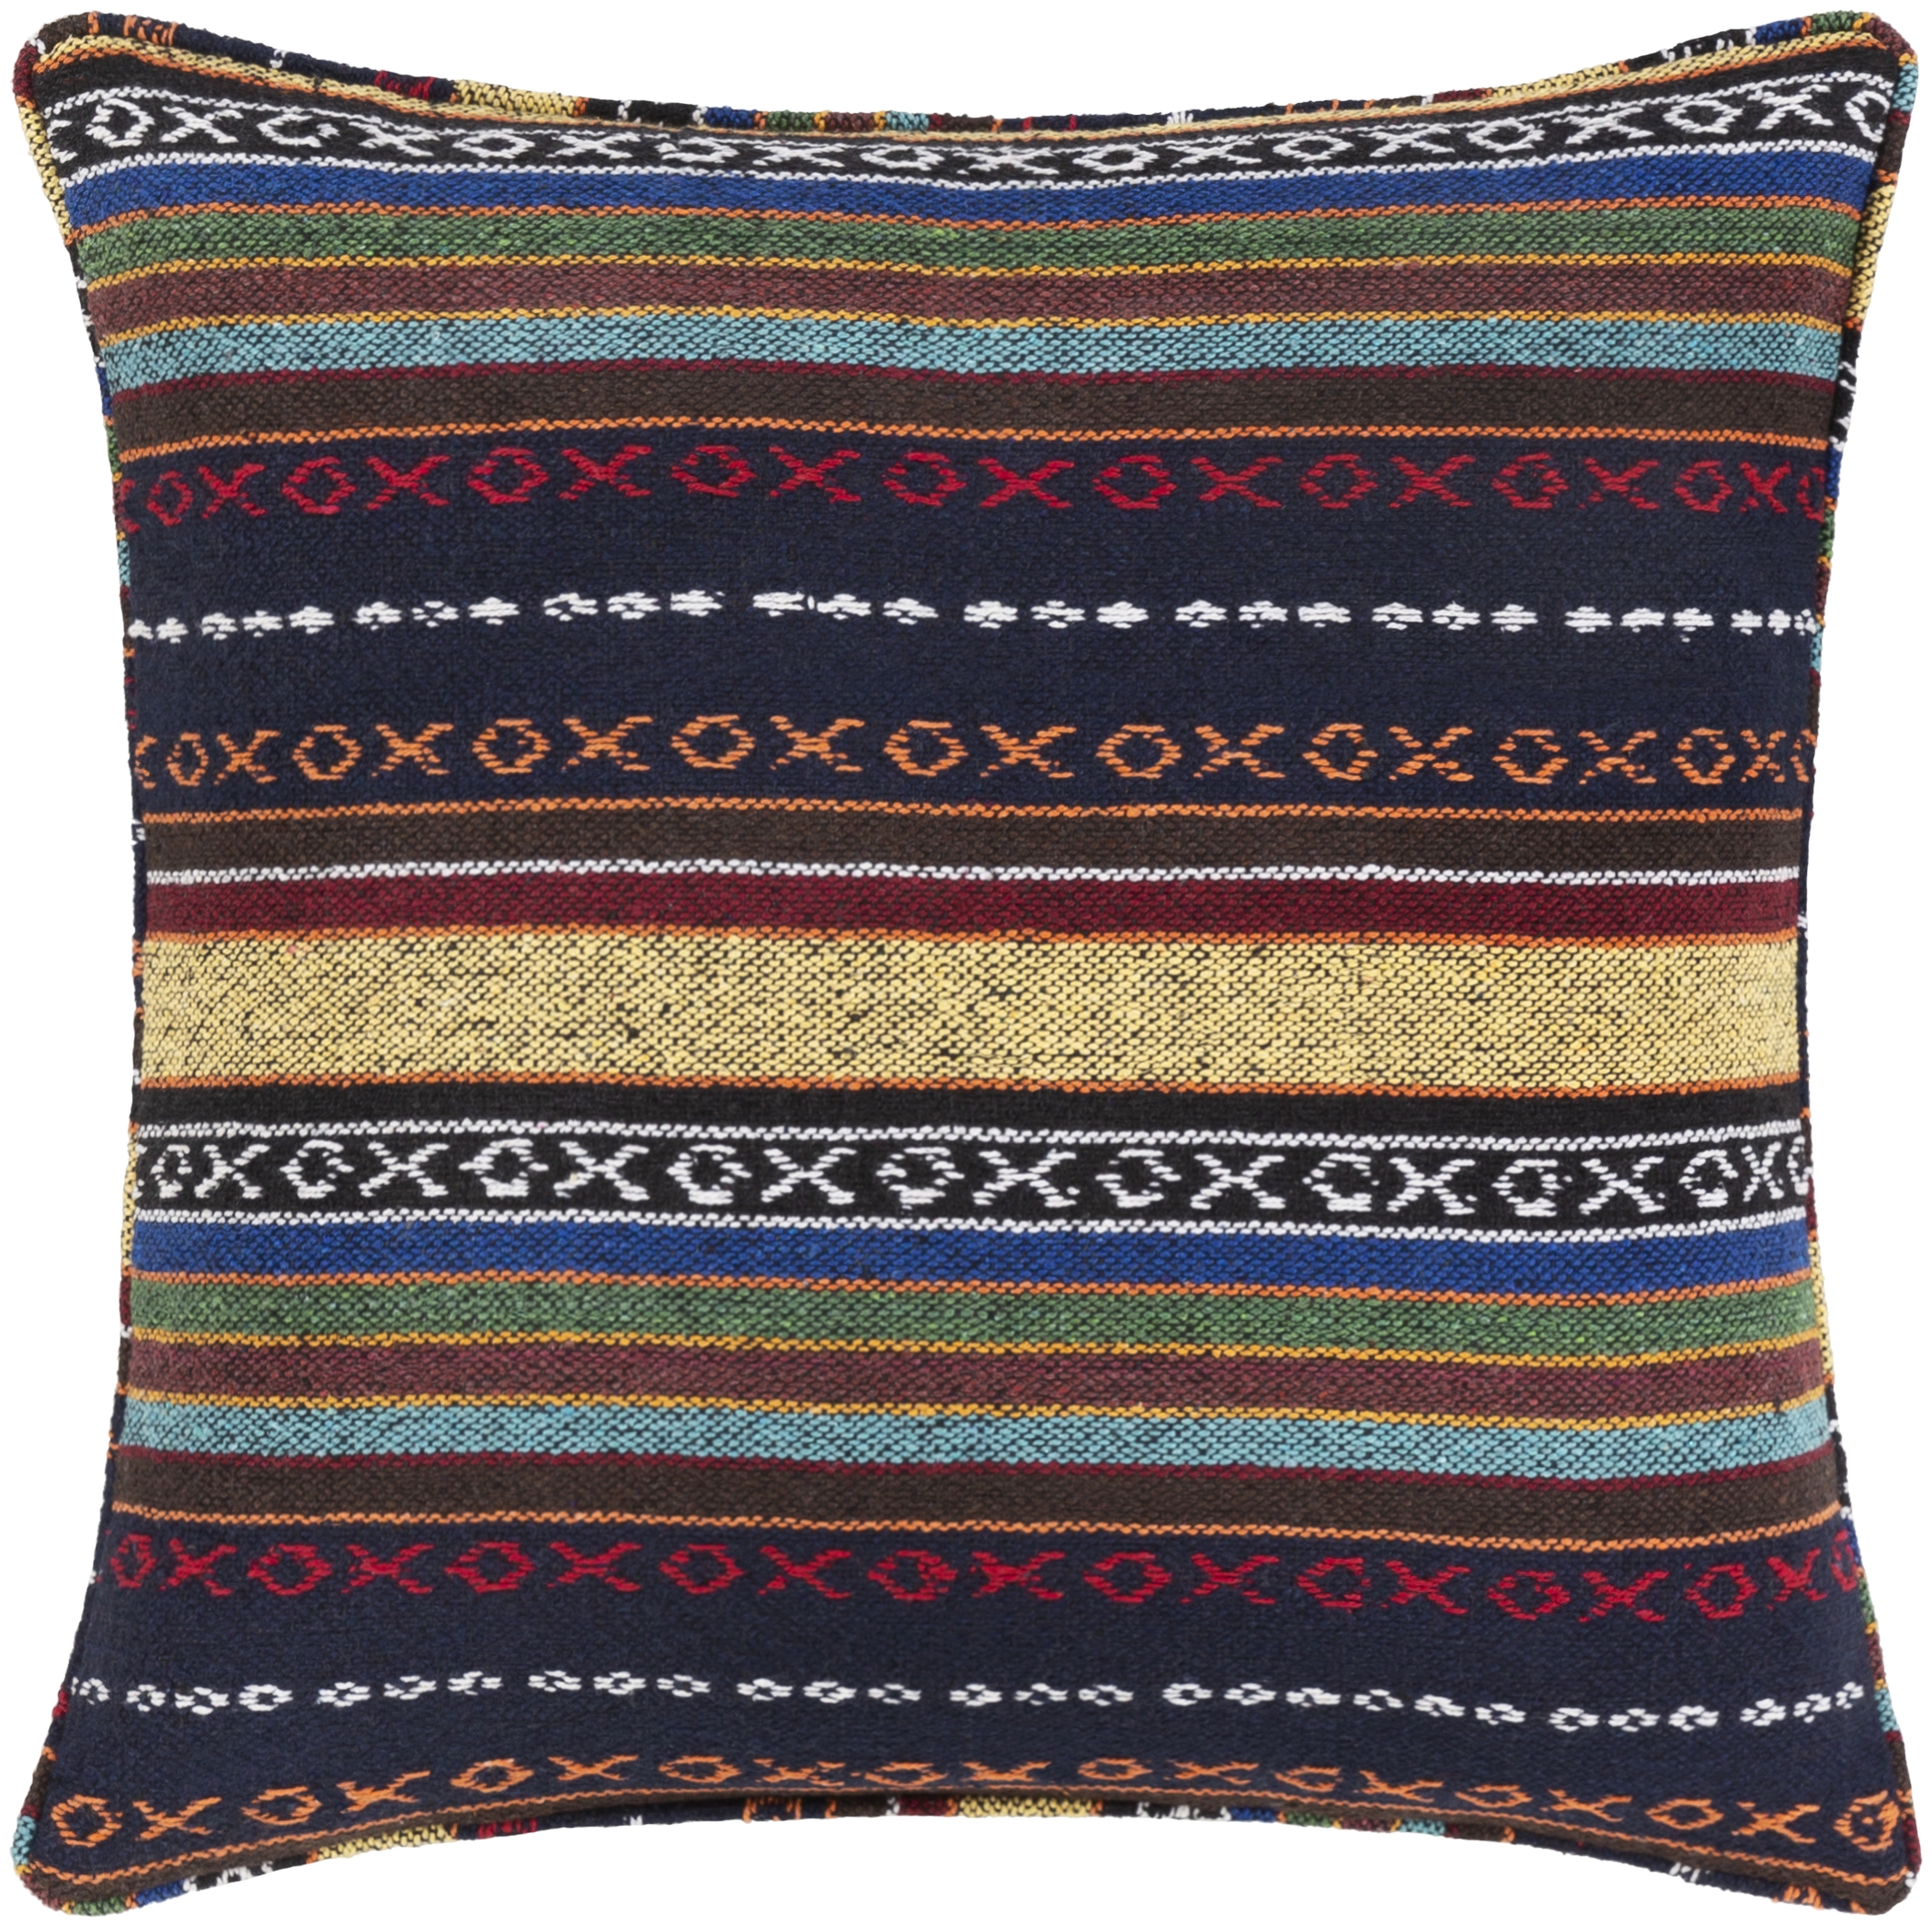 Maya - MYP-004 - 20" x 20" - pillow cover only - Image 0